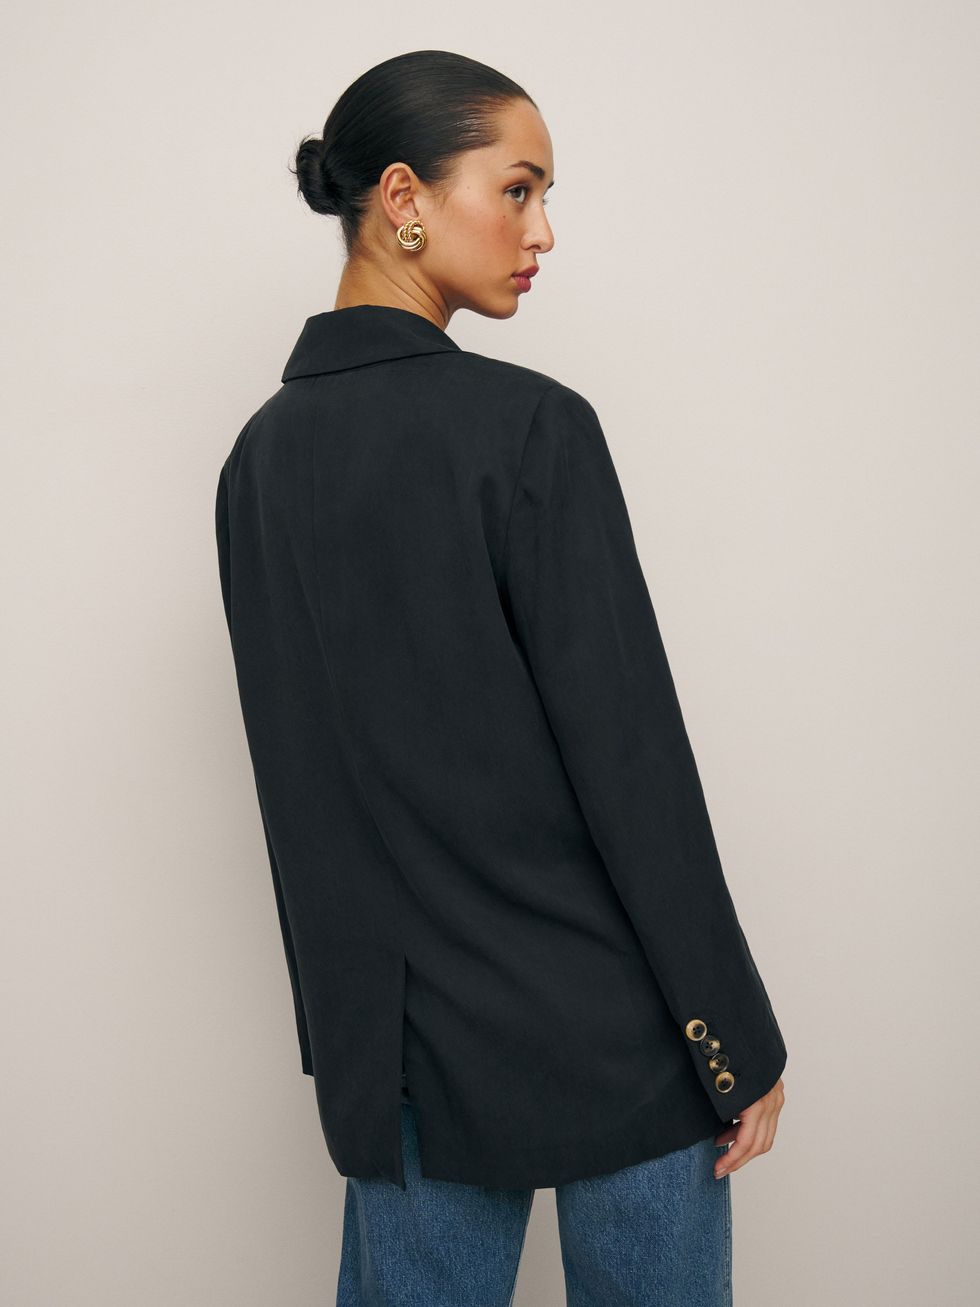 Reformation The Classic Relaxed Blazer